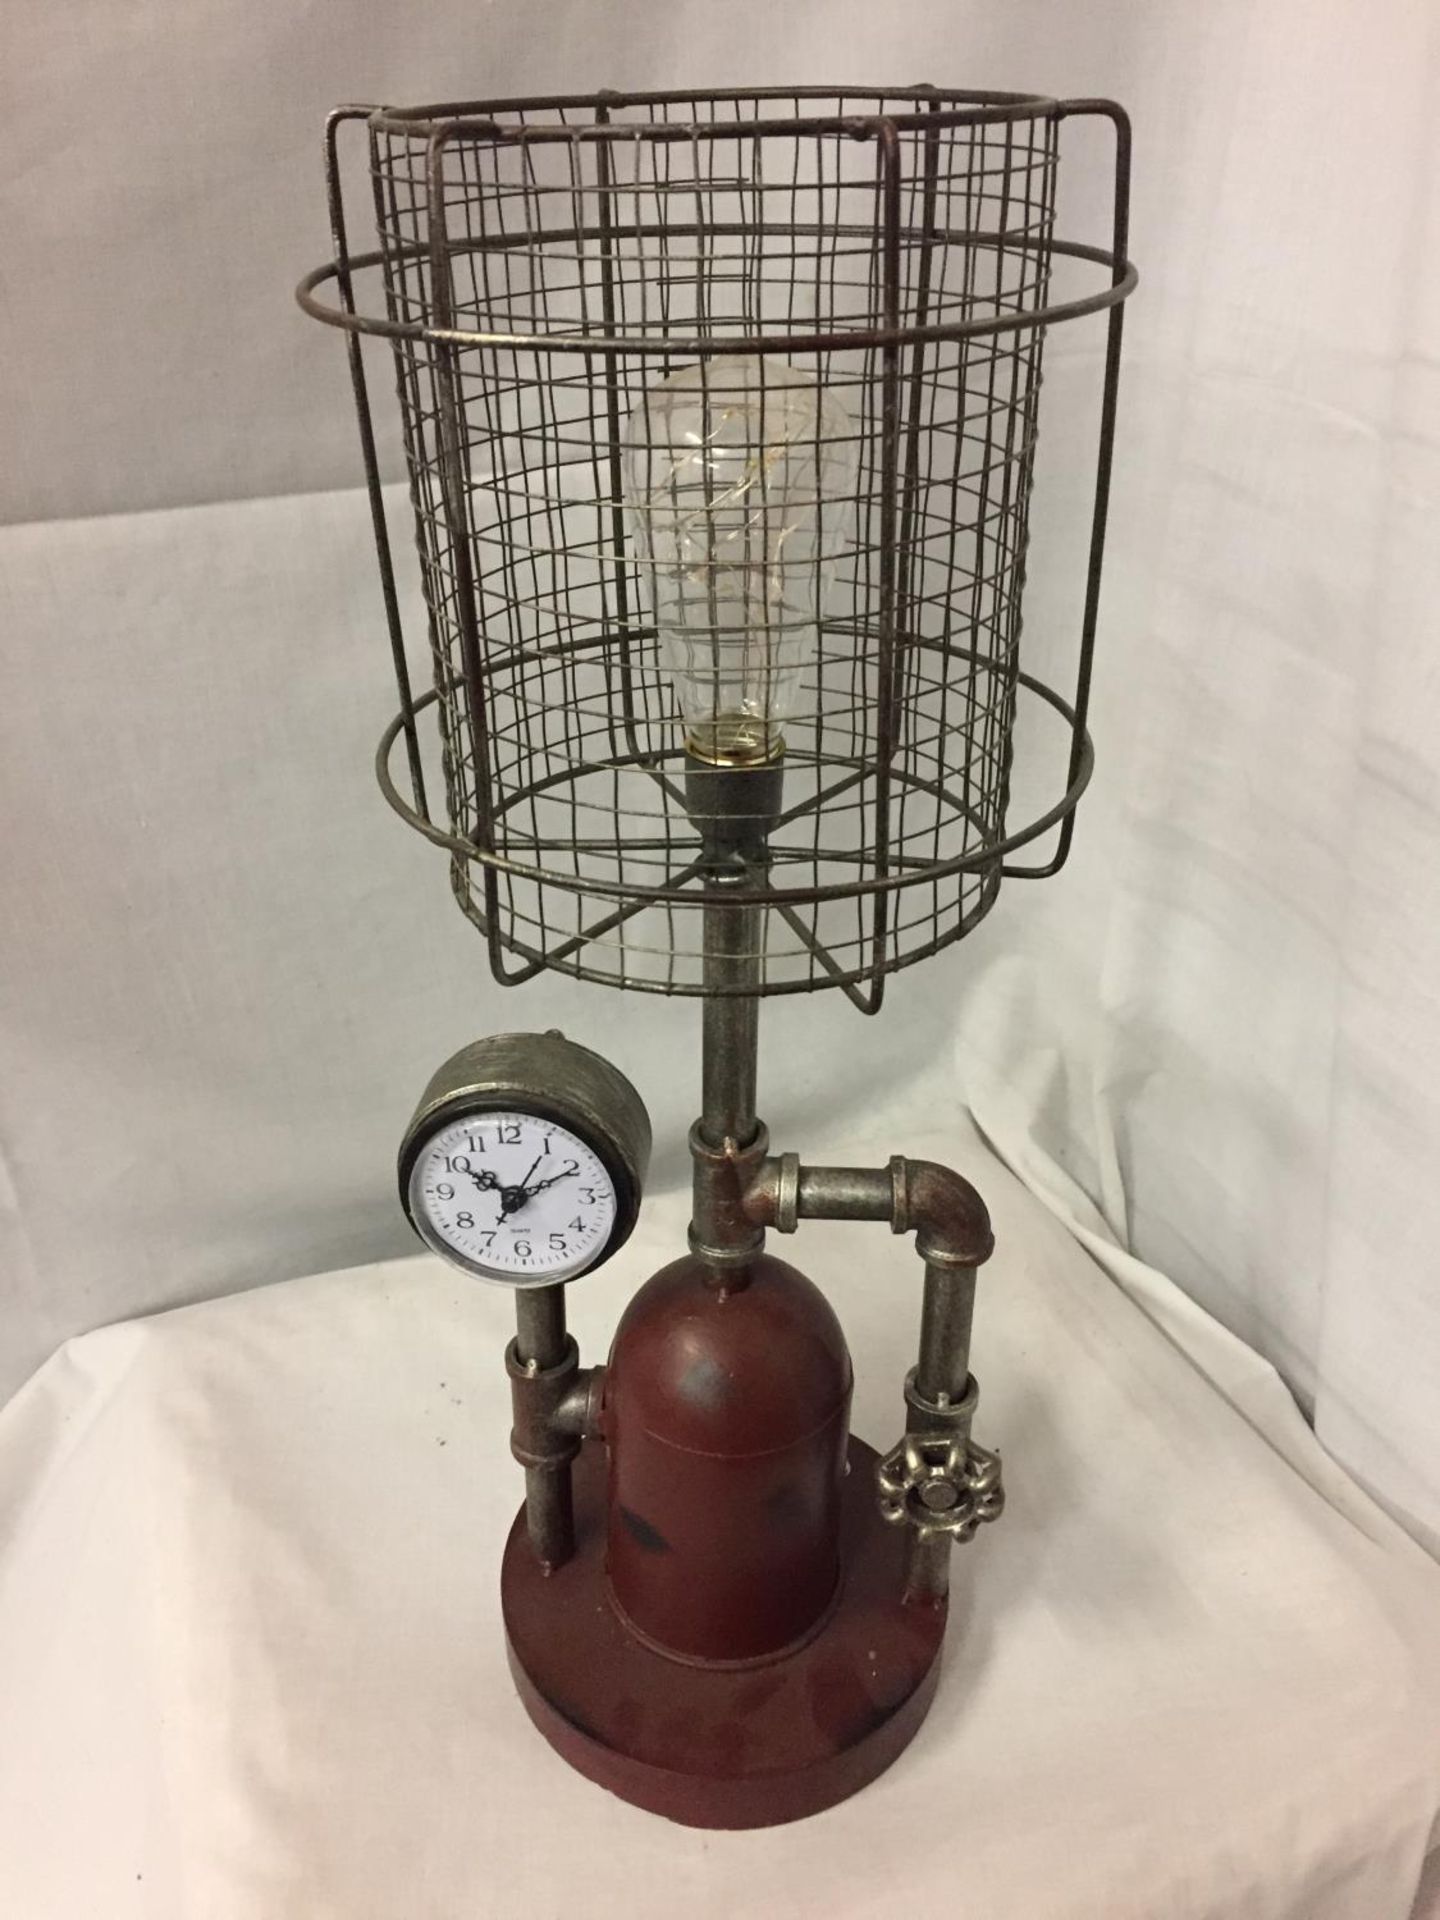 A STEAM PUNK STYLE DECORATIVE LAMP AND CLOCK